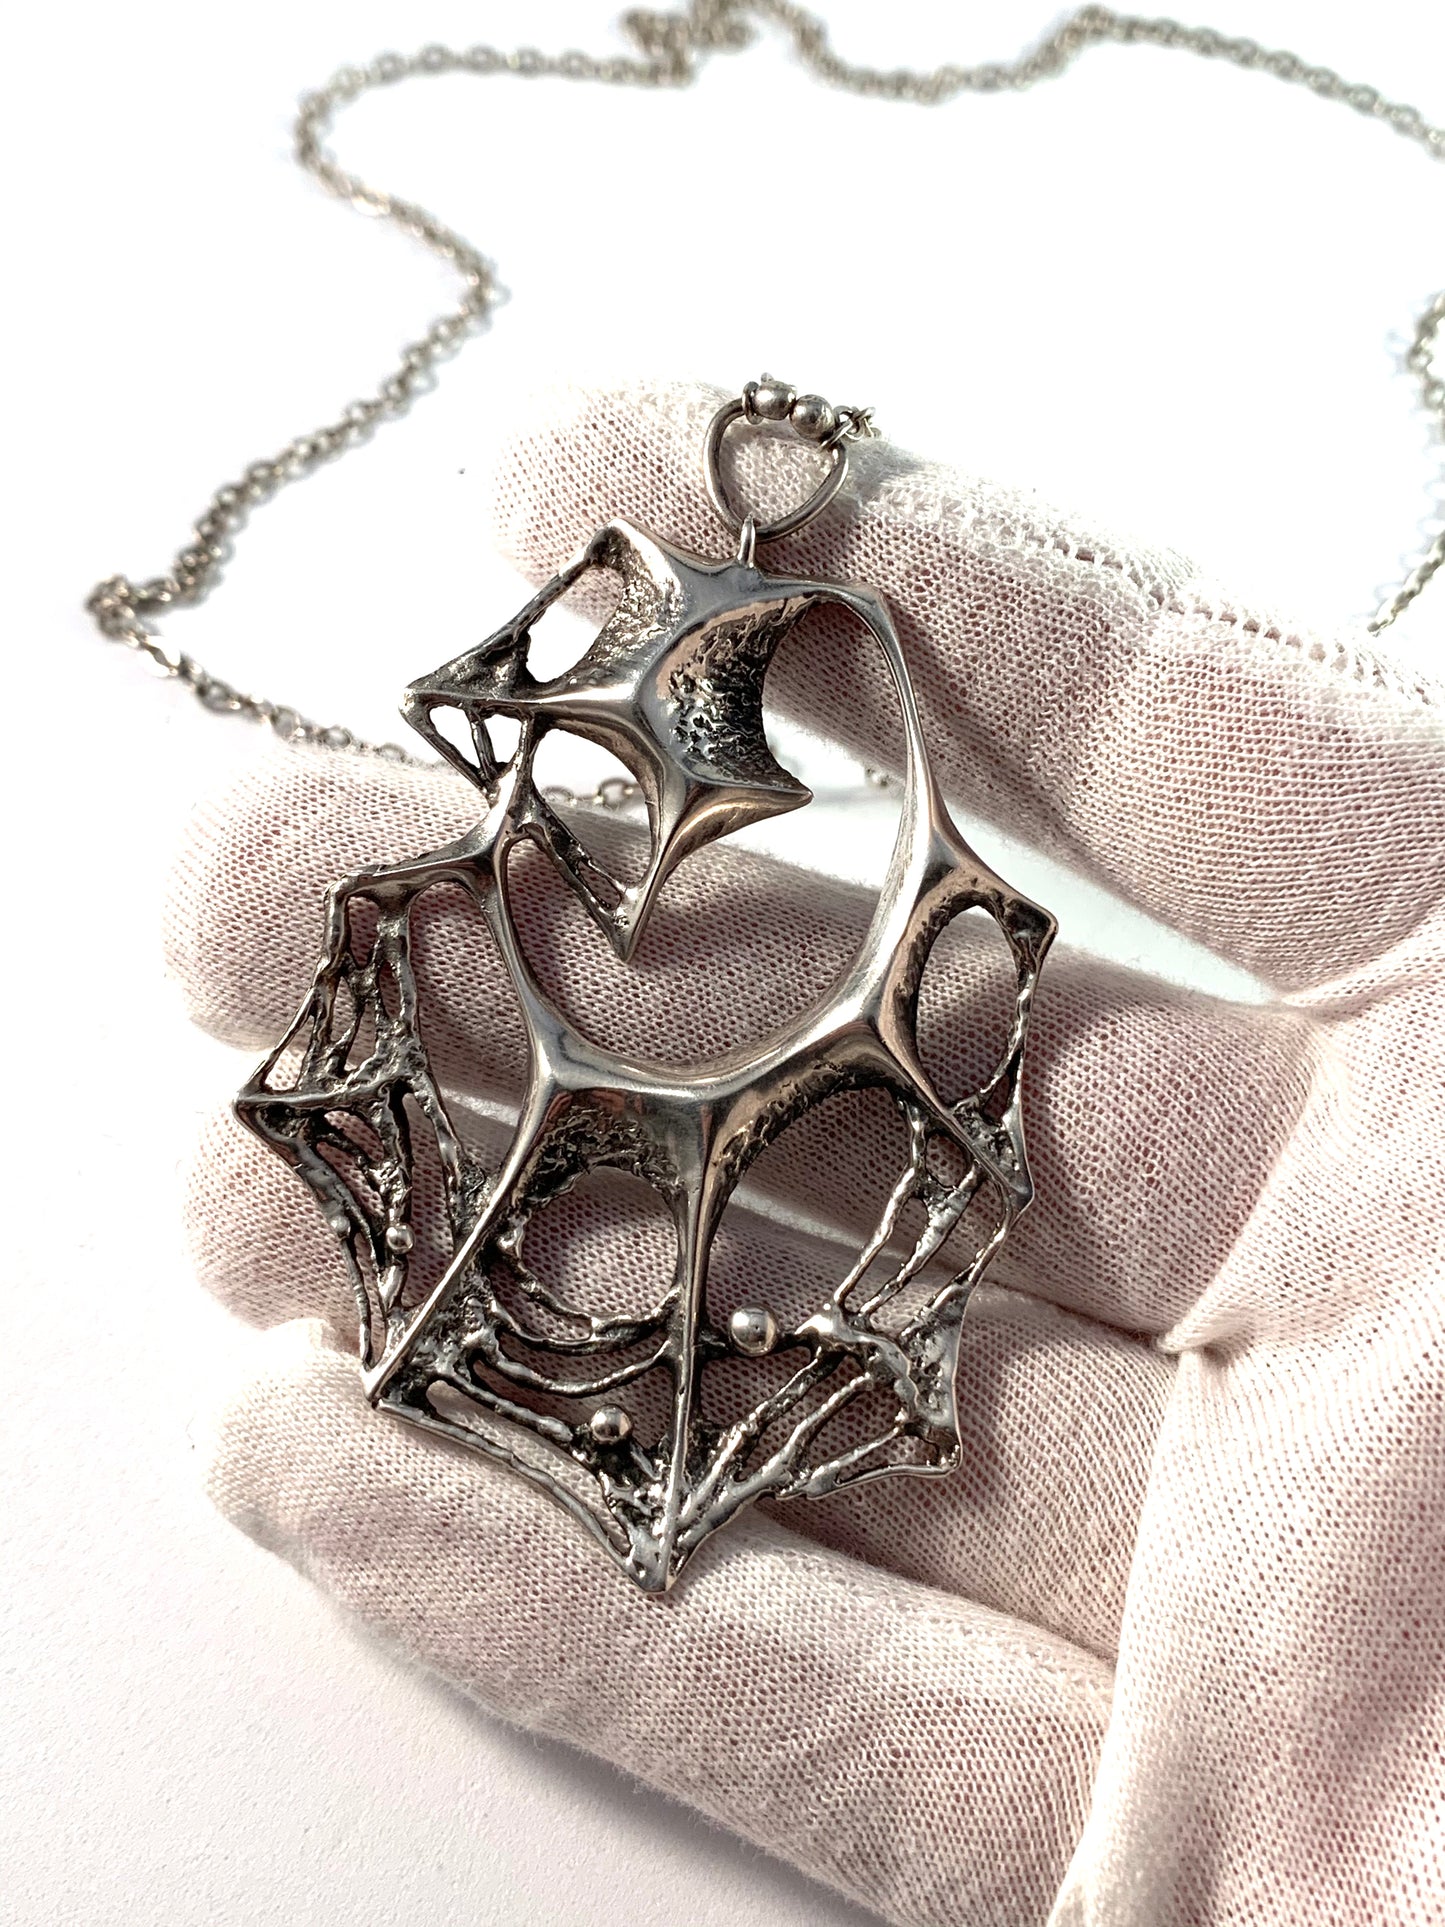 Karl Laine, Finland year 1961 Sterling Silver Spider Web Large Pendant Necklace.